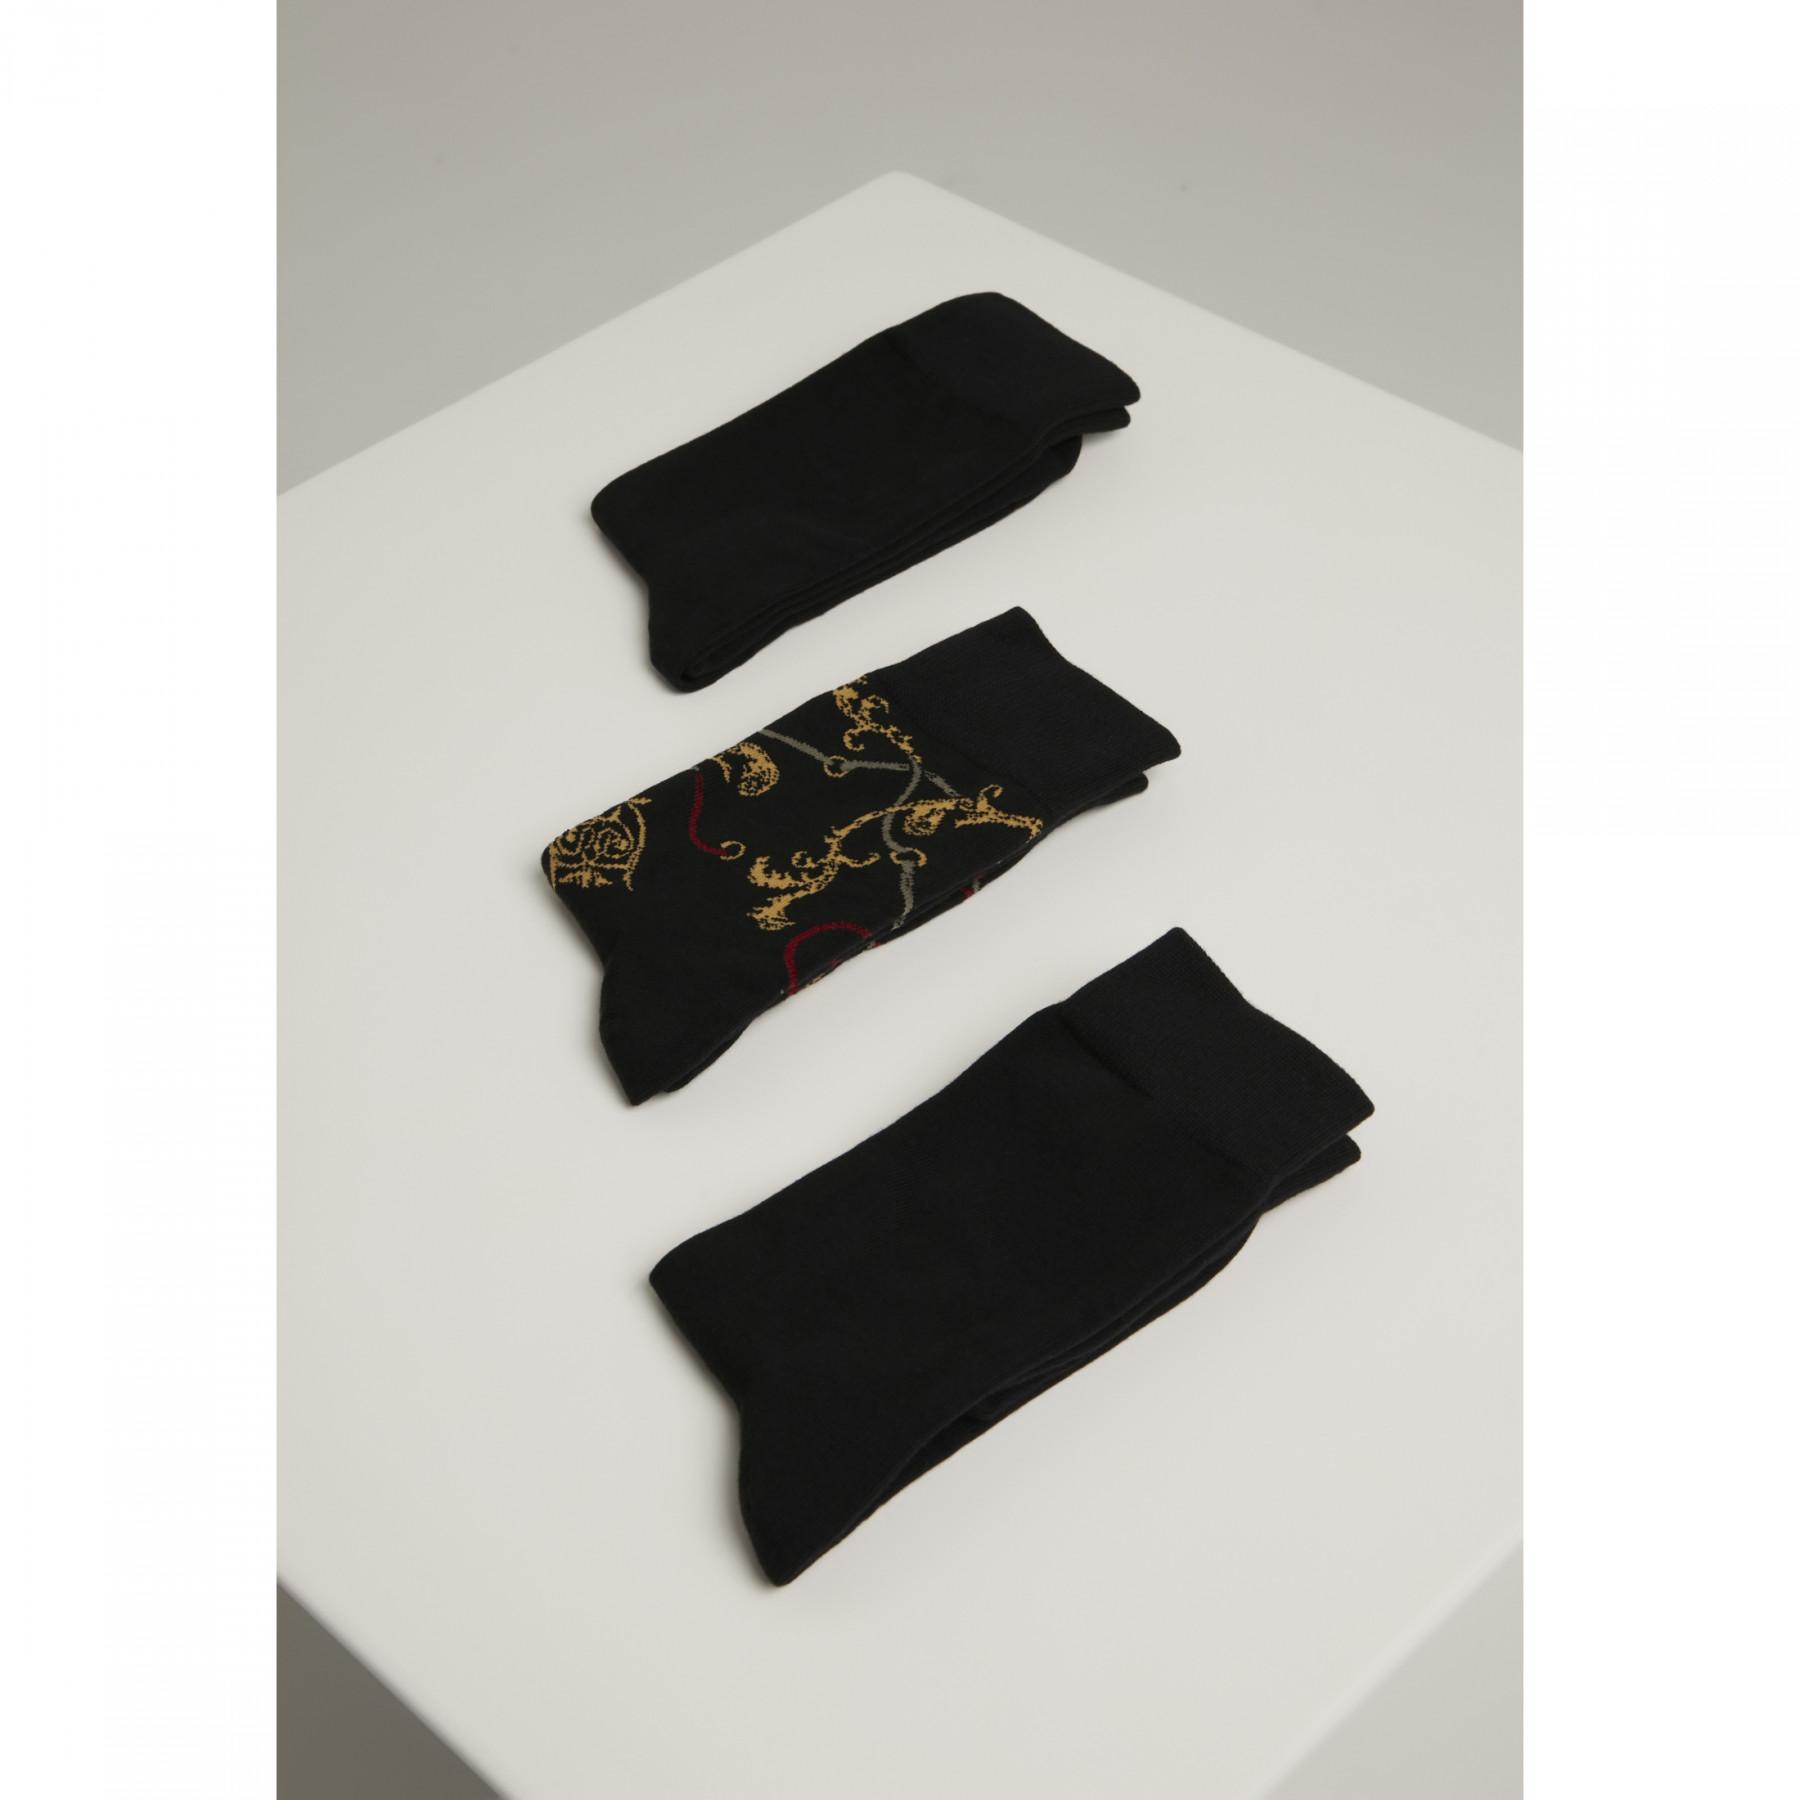 Chaussettes Urban Classic luxury